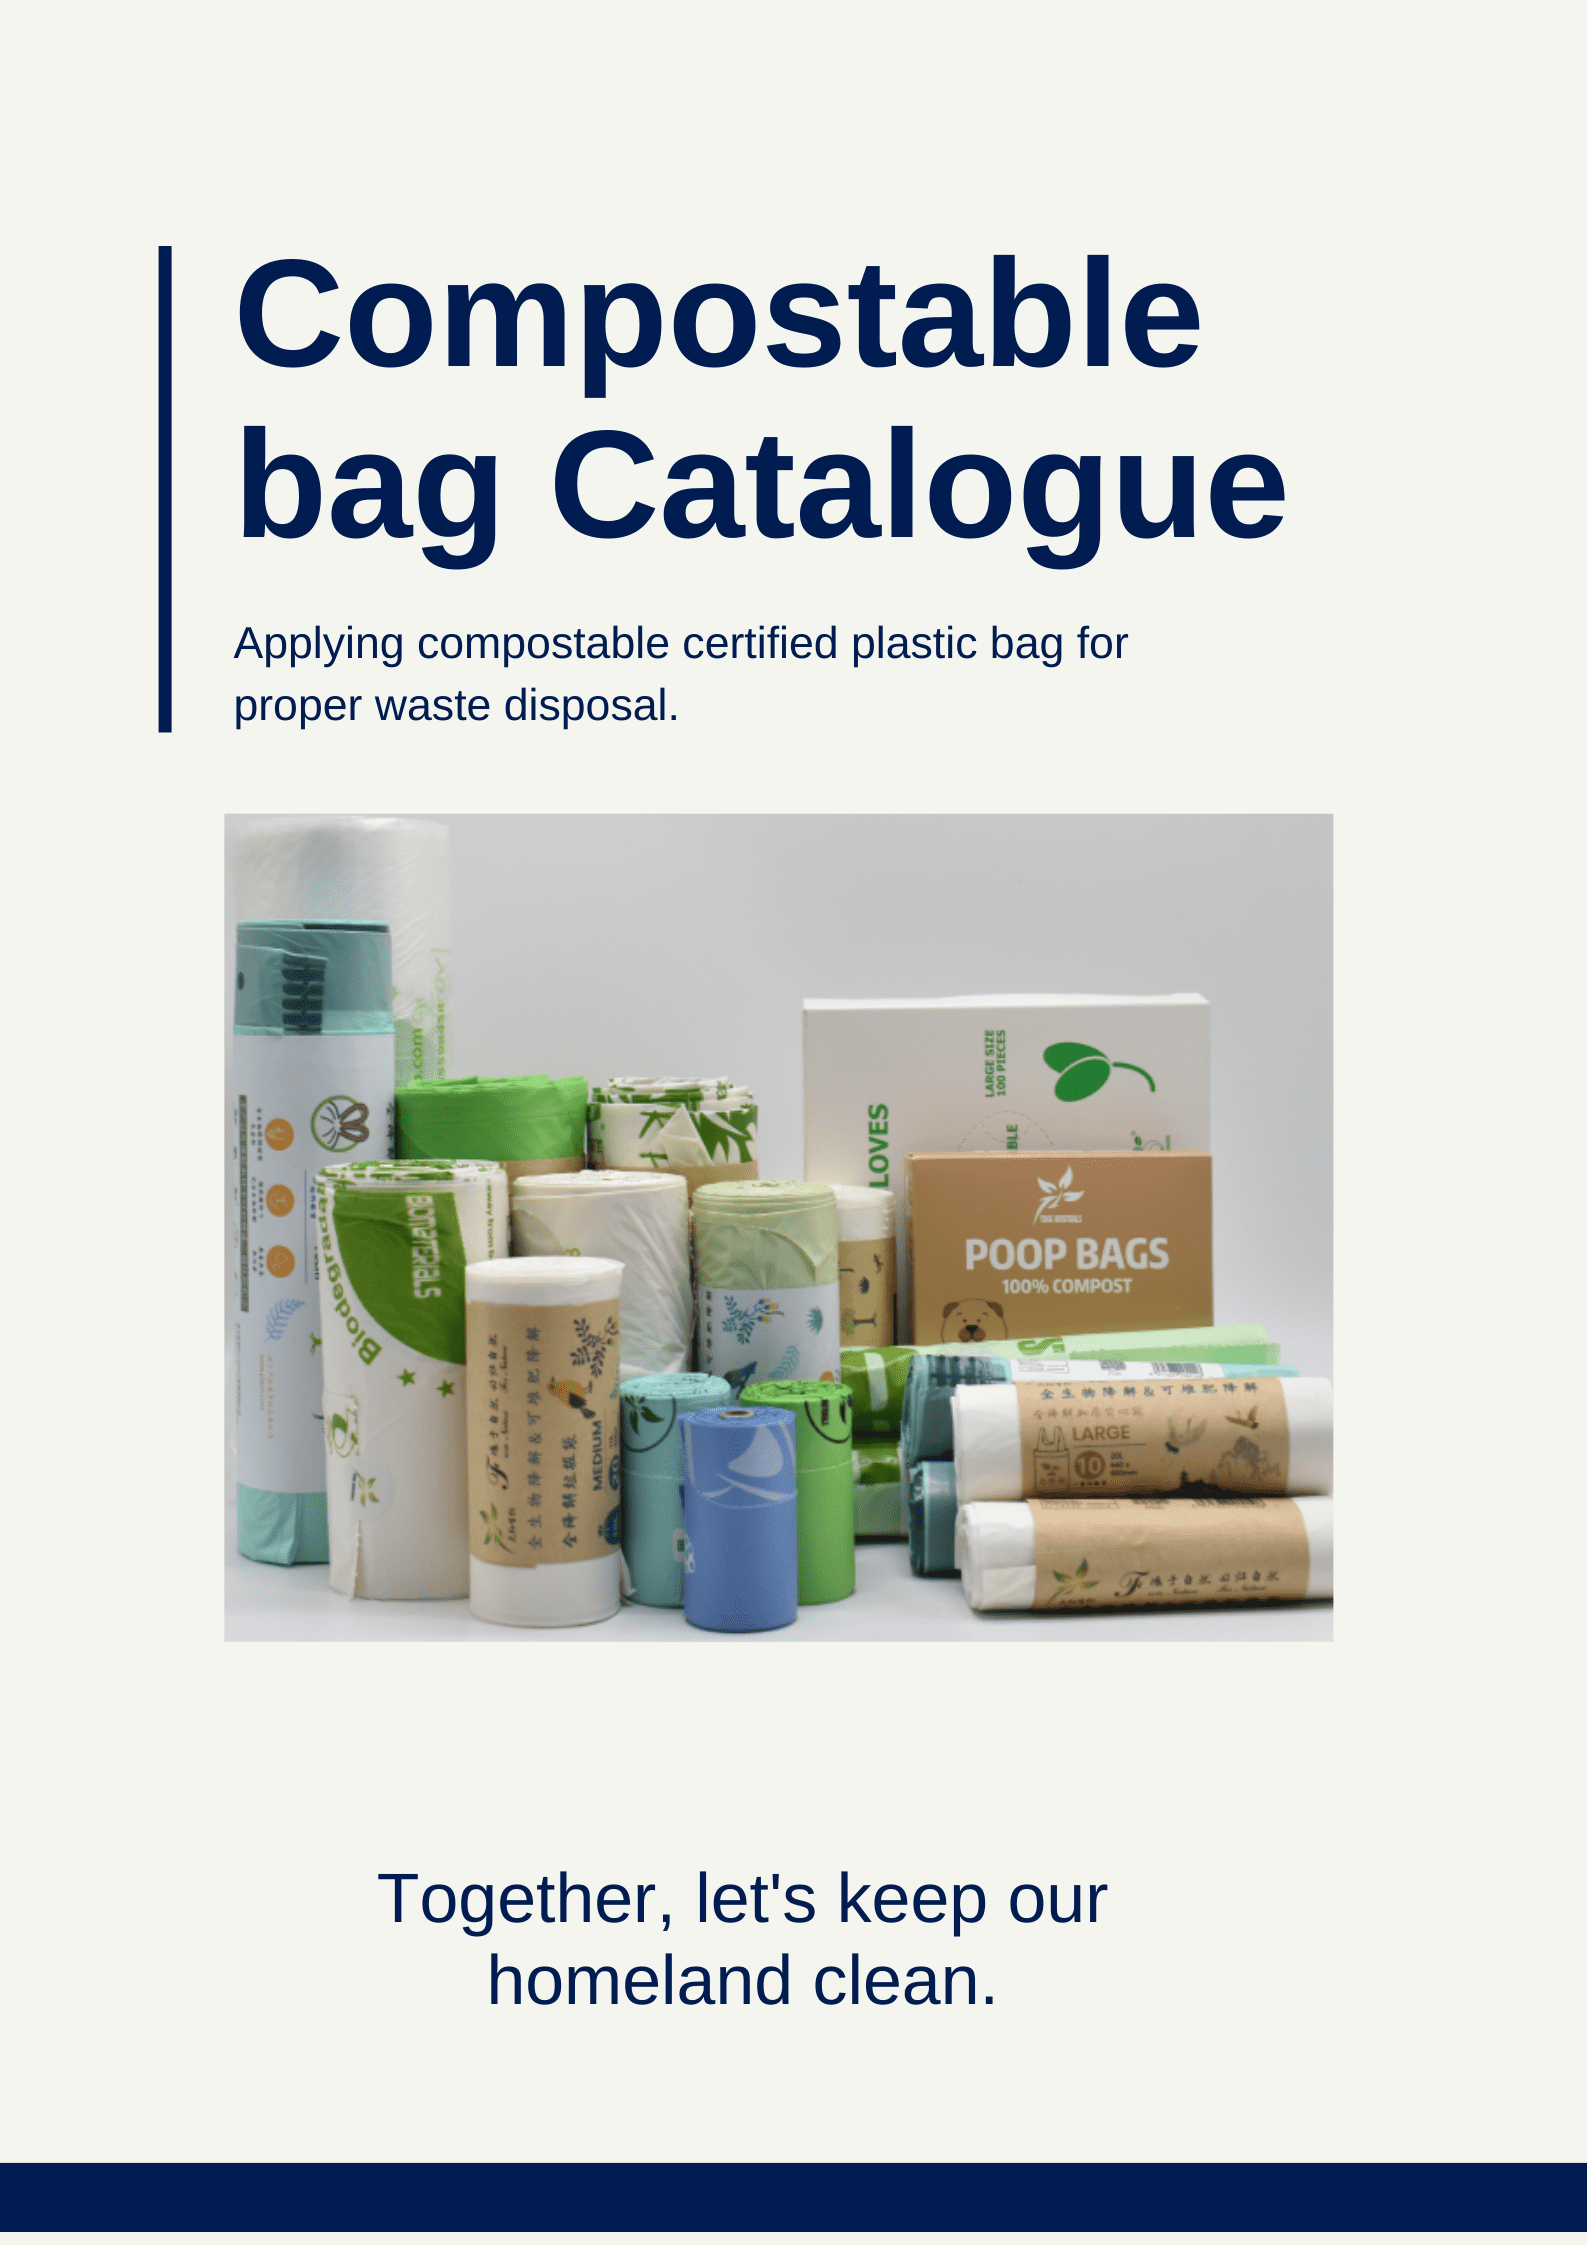 Compostable plastic bags